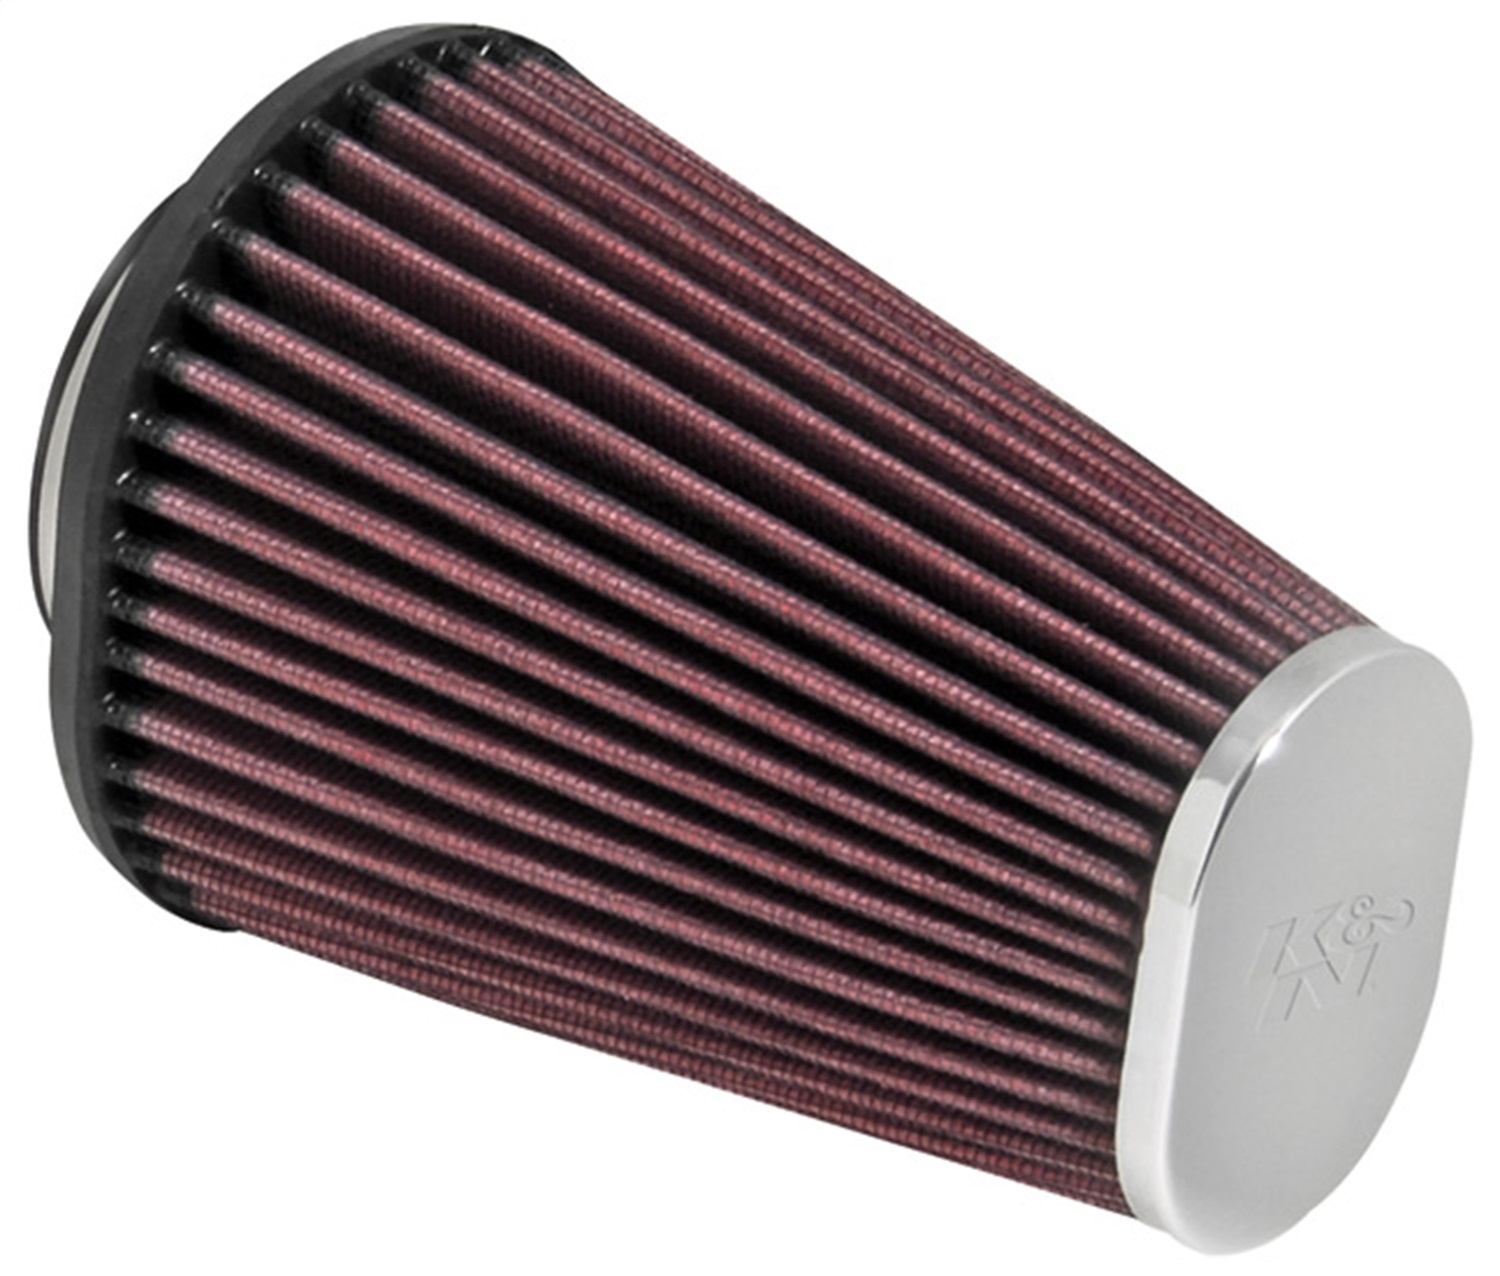 K&N Filters K&N Filters RC-3680 Universal Air Cleaner Assembly